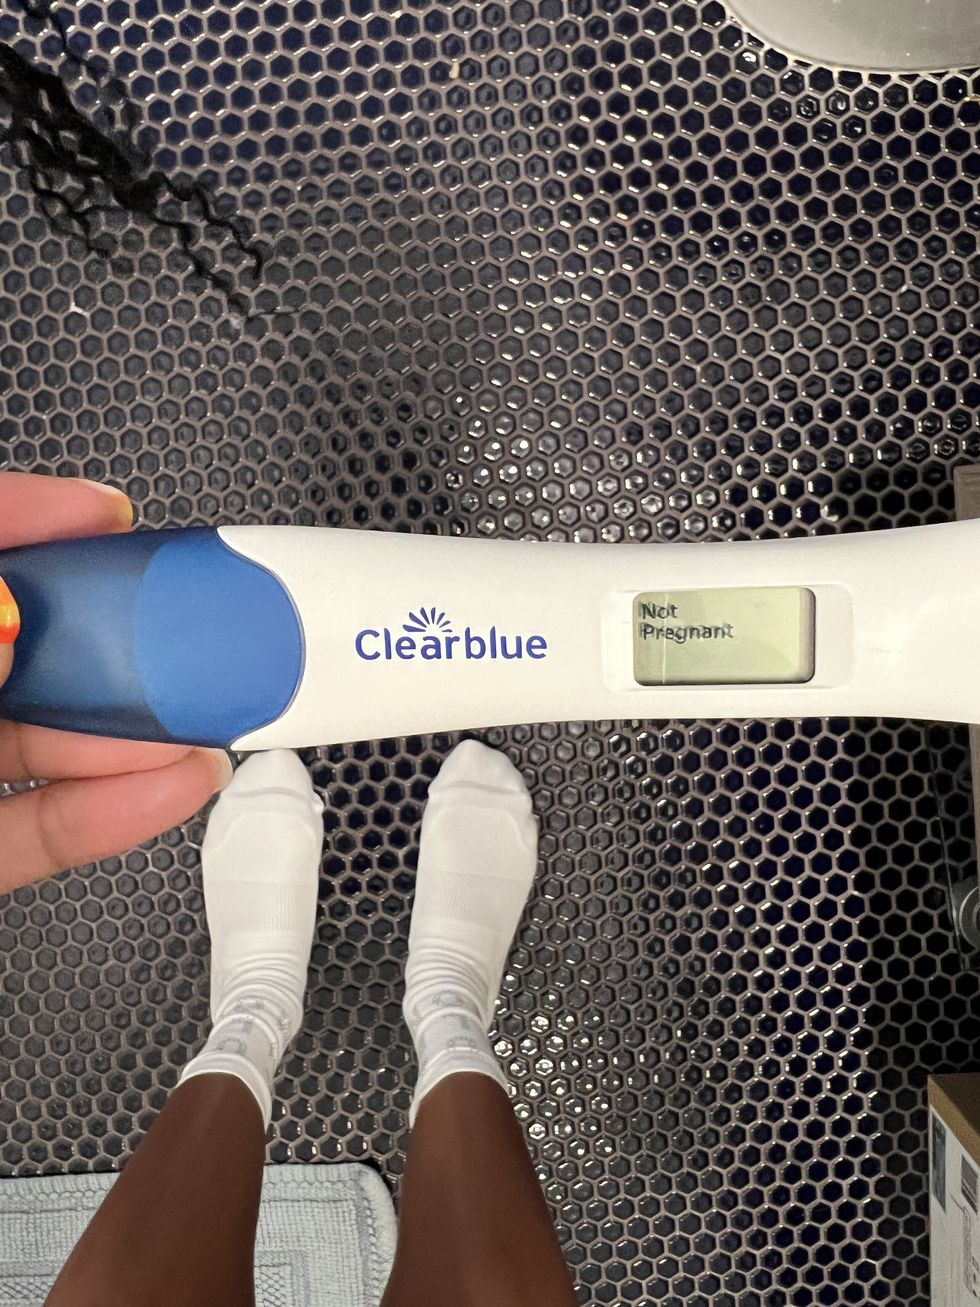 pregnancy test that reads not pregnant